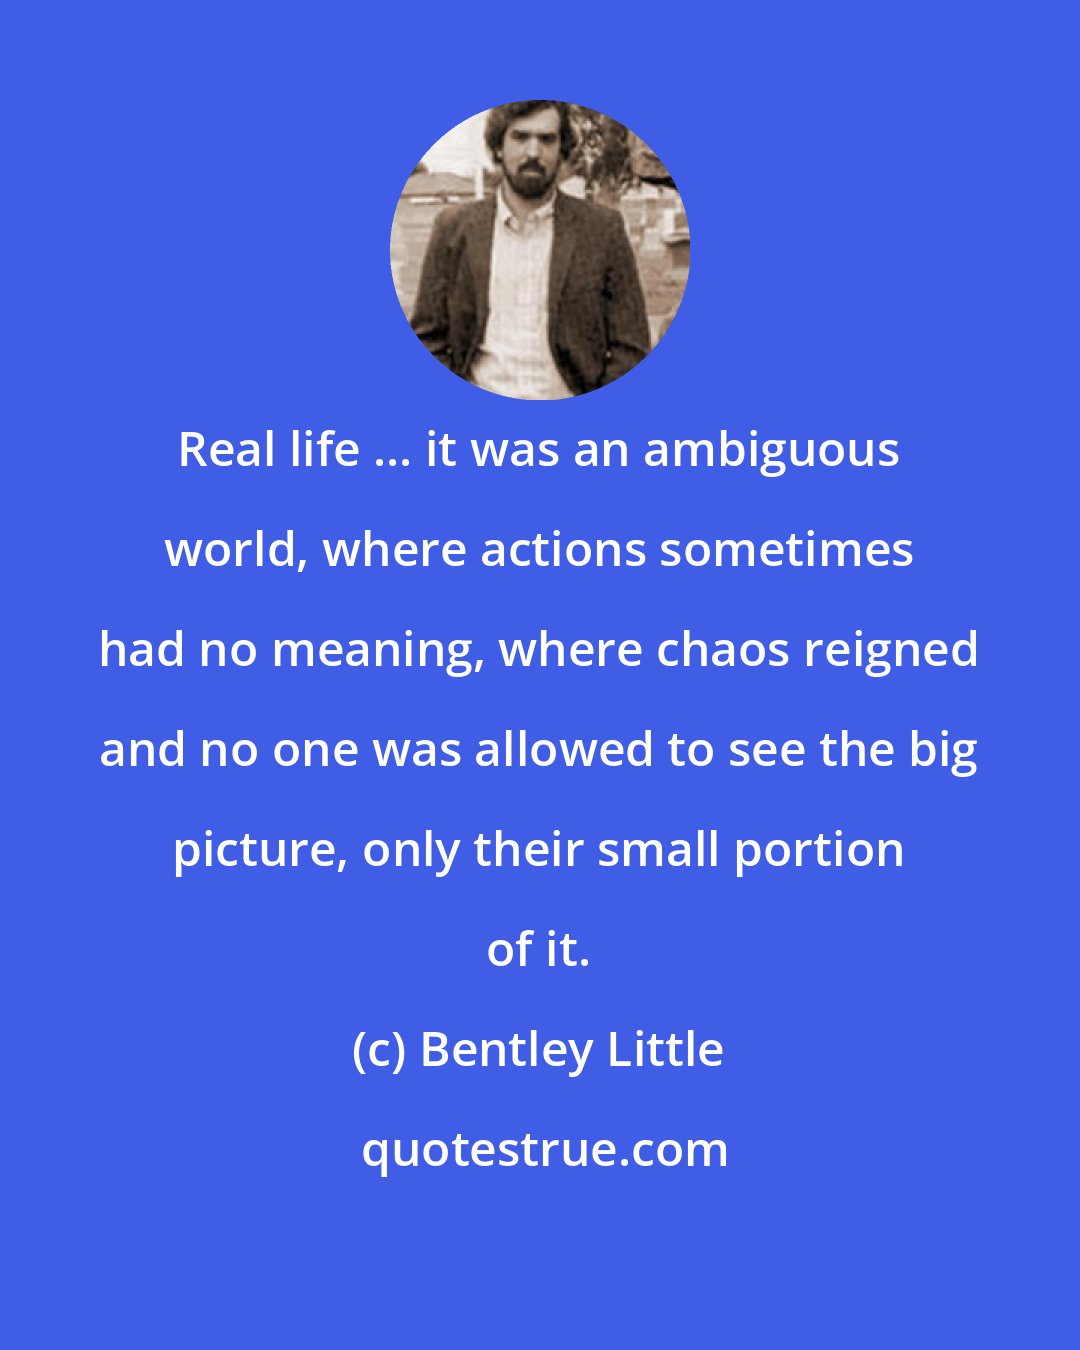 Bentley Little: Real life ... it was an ambiguous world, where actions sometimes had no meaning, where chaos reigned and no one was allowed to see the big picture, only their small portion of it.